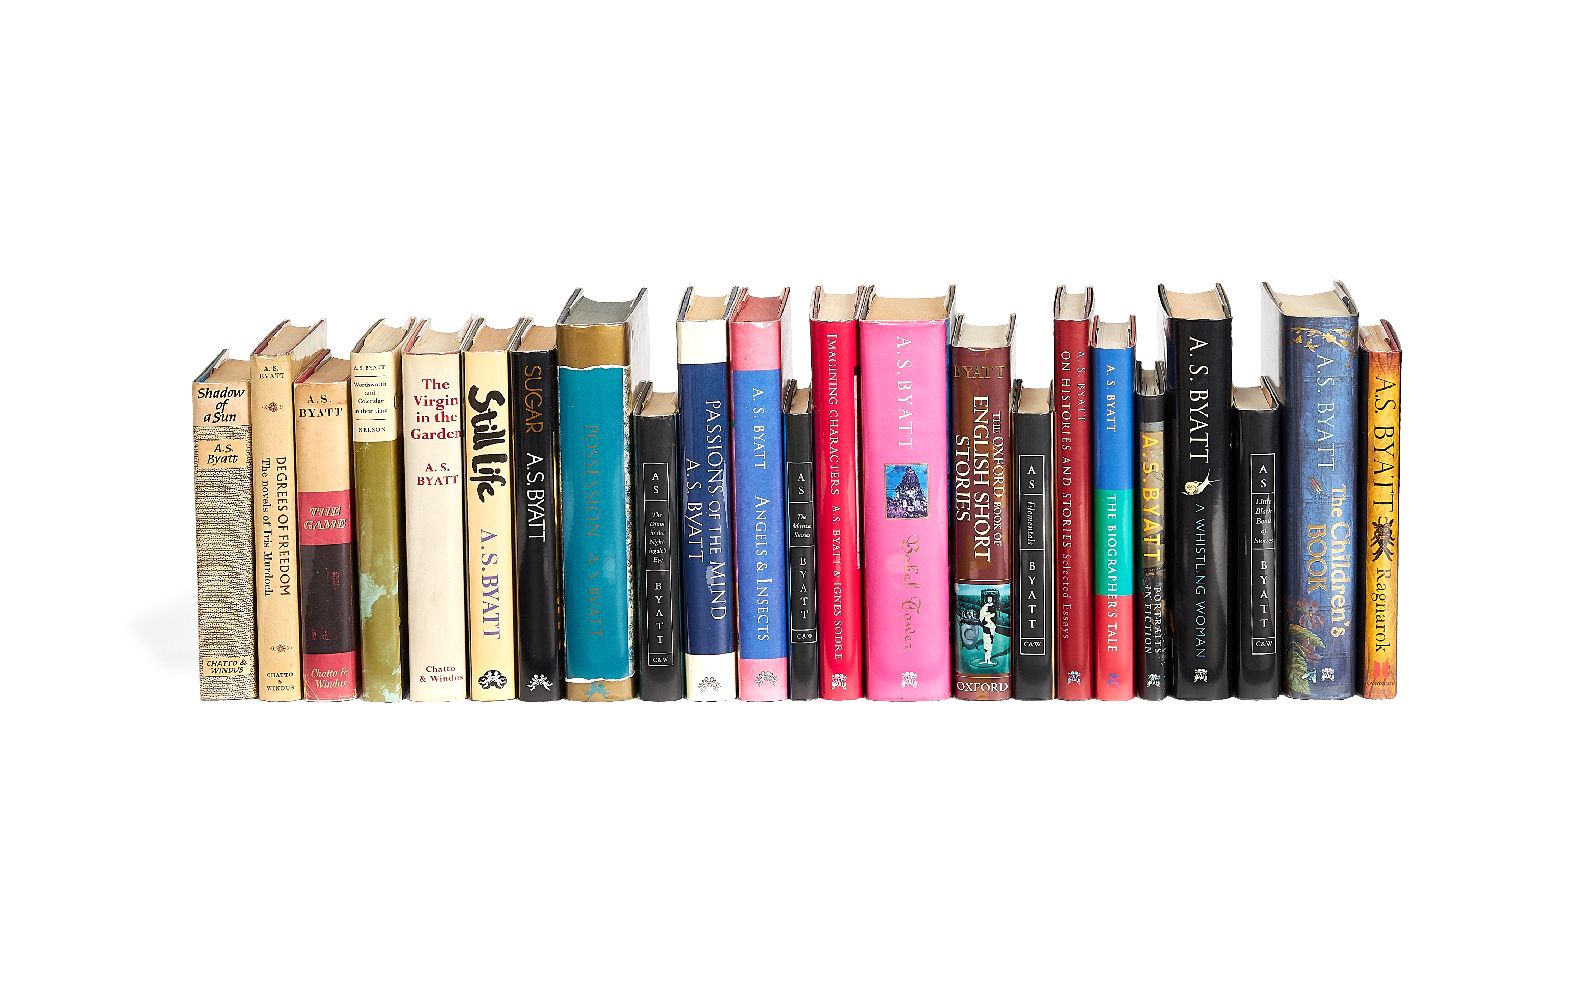 Ɵ A.S. Byatt, Works including complete set of novels, first editions, signed by the author